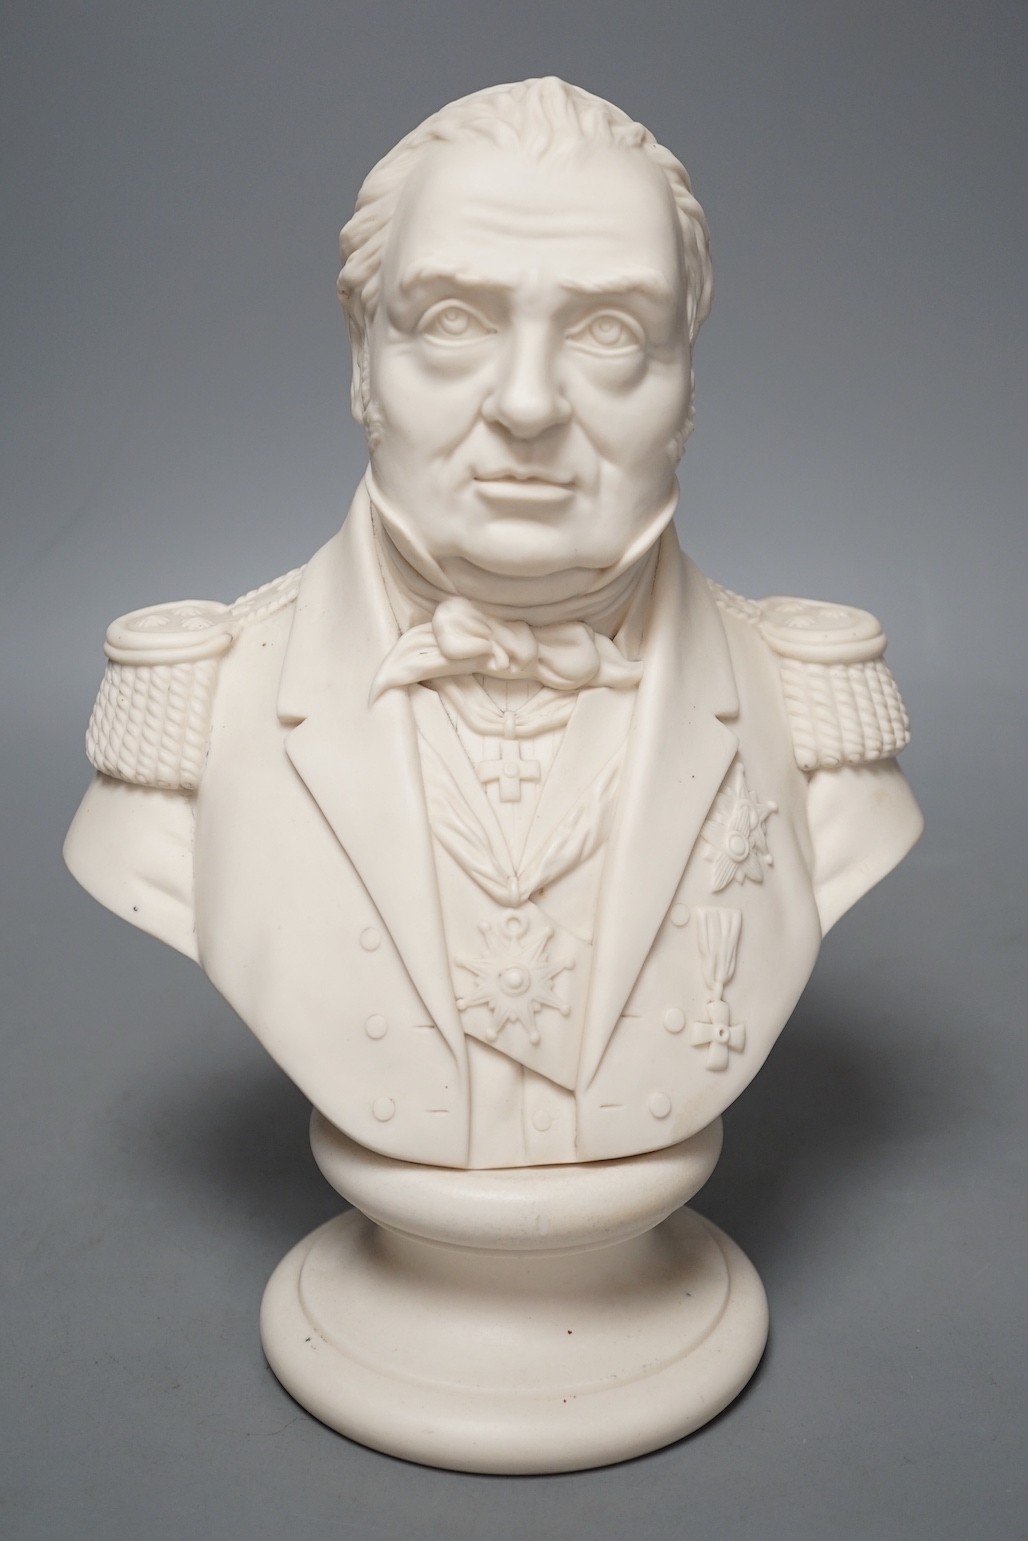 A Parian bust of Admiral Sir Charles Napier, by Samuel Alcock & Co. - 27.5cm tall